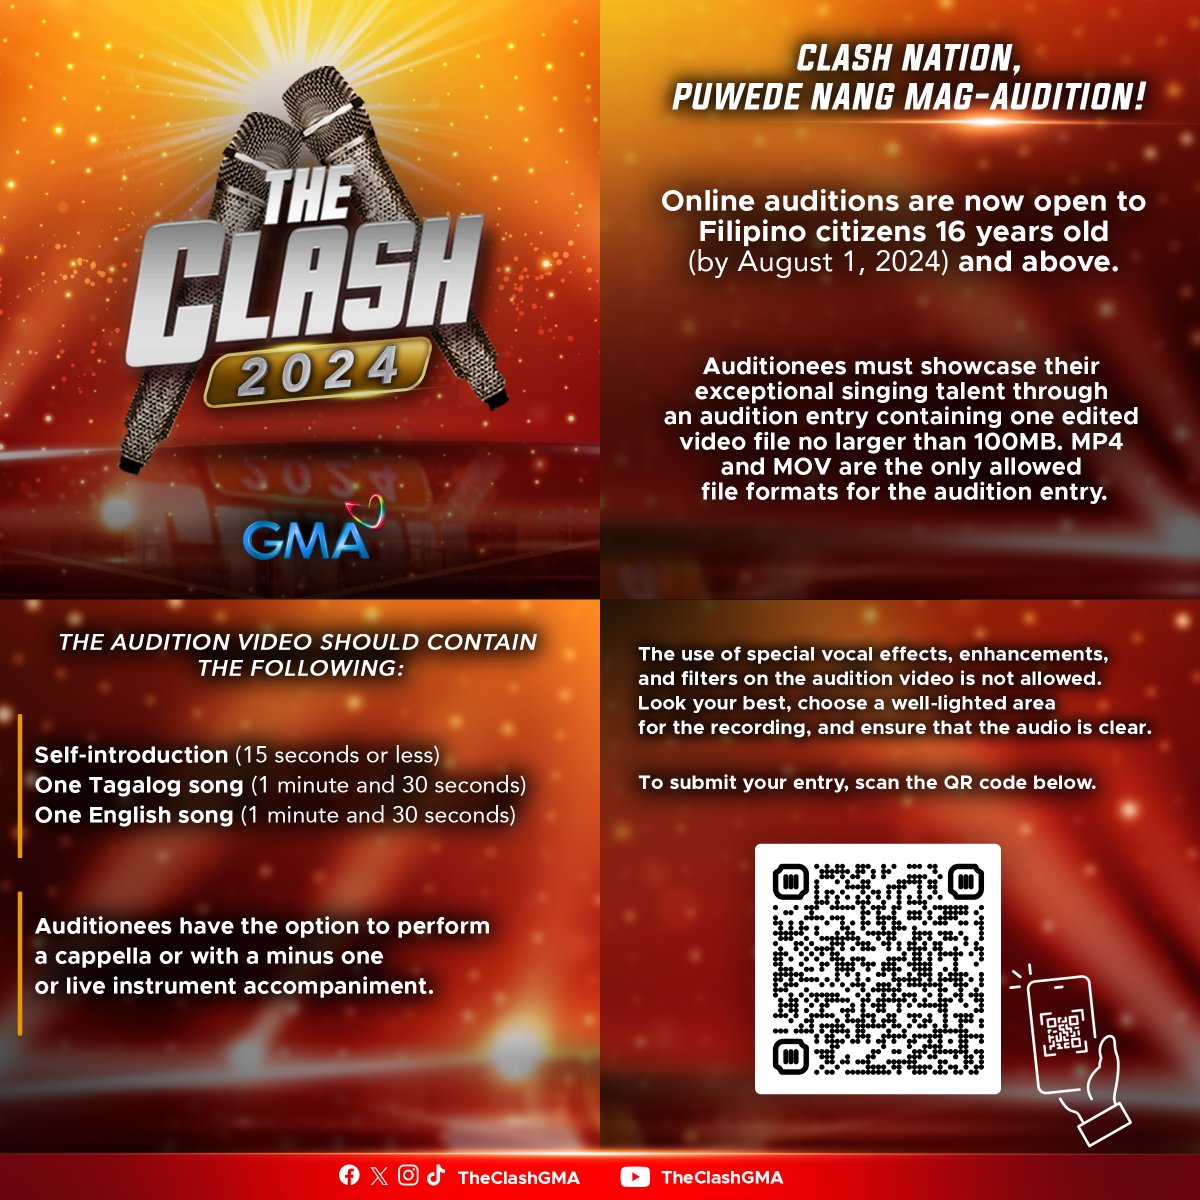 Auditions for #TheClash2024 are officially open! 🙌 Interested auditionees who are FILIPINO CITIZENS and are 16 years old and above may scan the QR code on the poster to audition! Follow us @TheClashGMA for more updates! Good luck and see you!